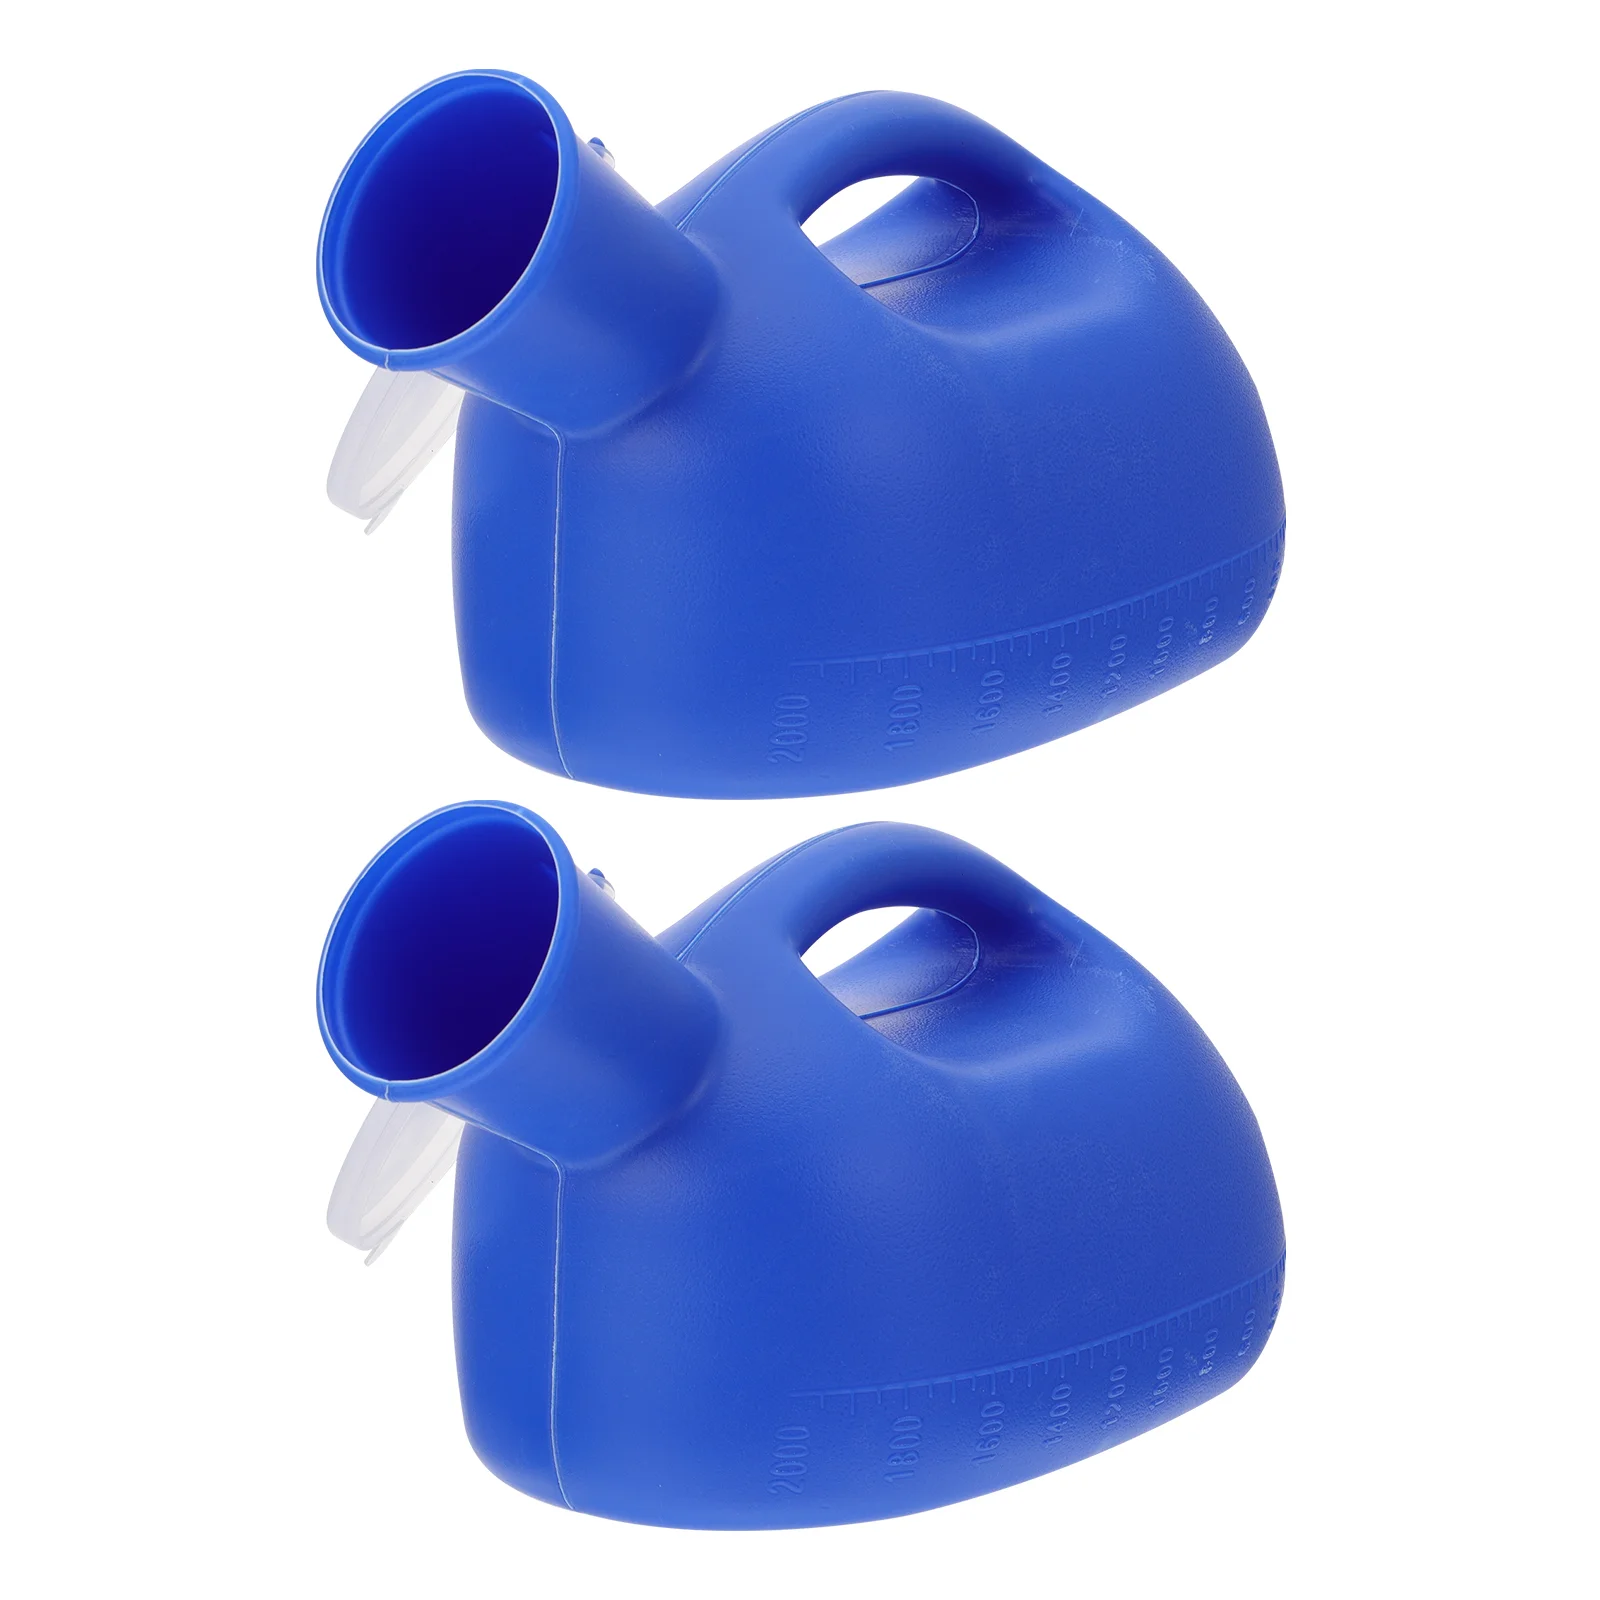 

2Pcs Urinal Bucket Practical Elder Spittoon with Lids Large Capacity Chamber Pot